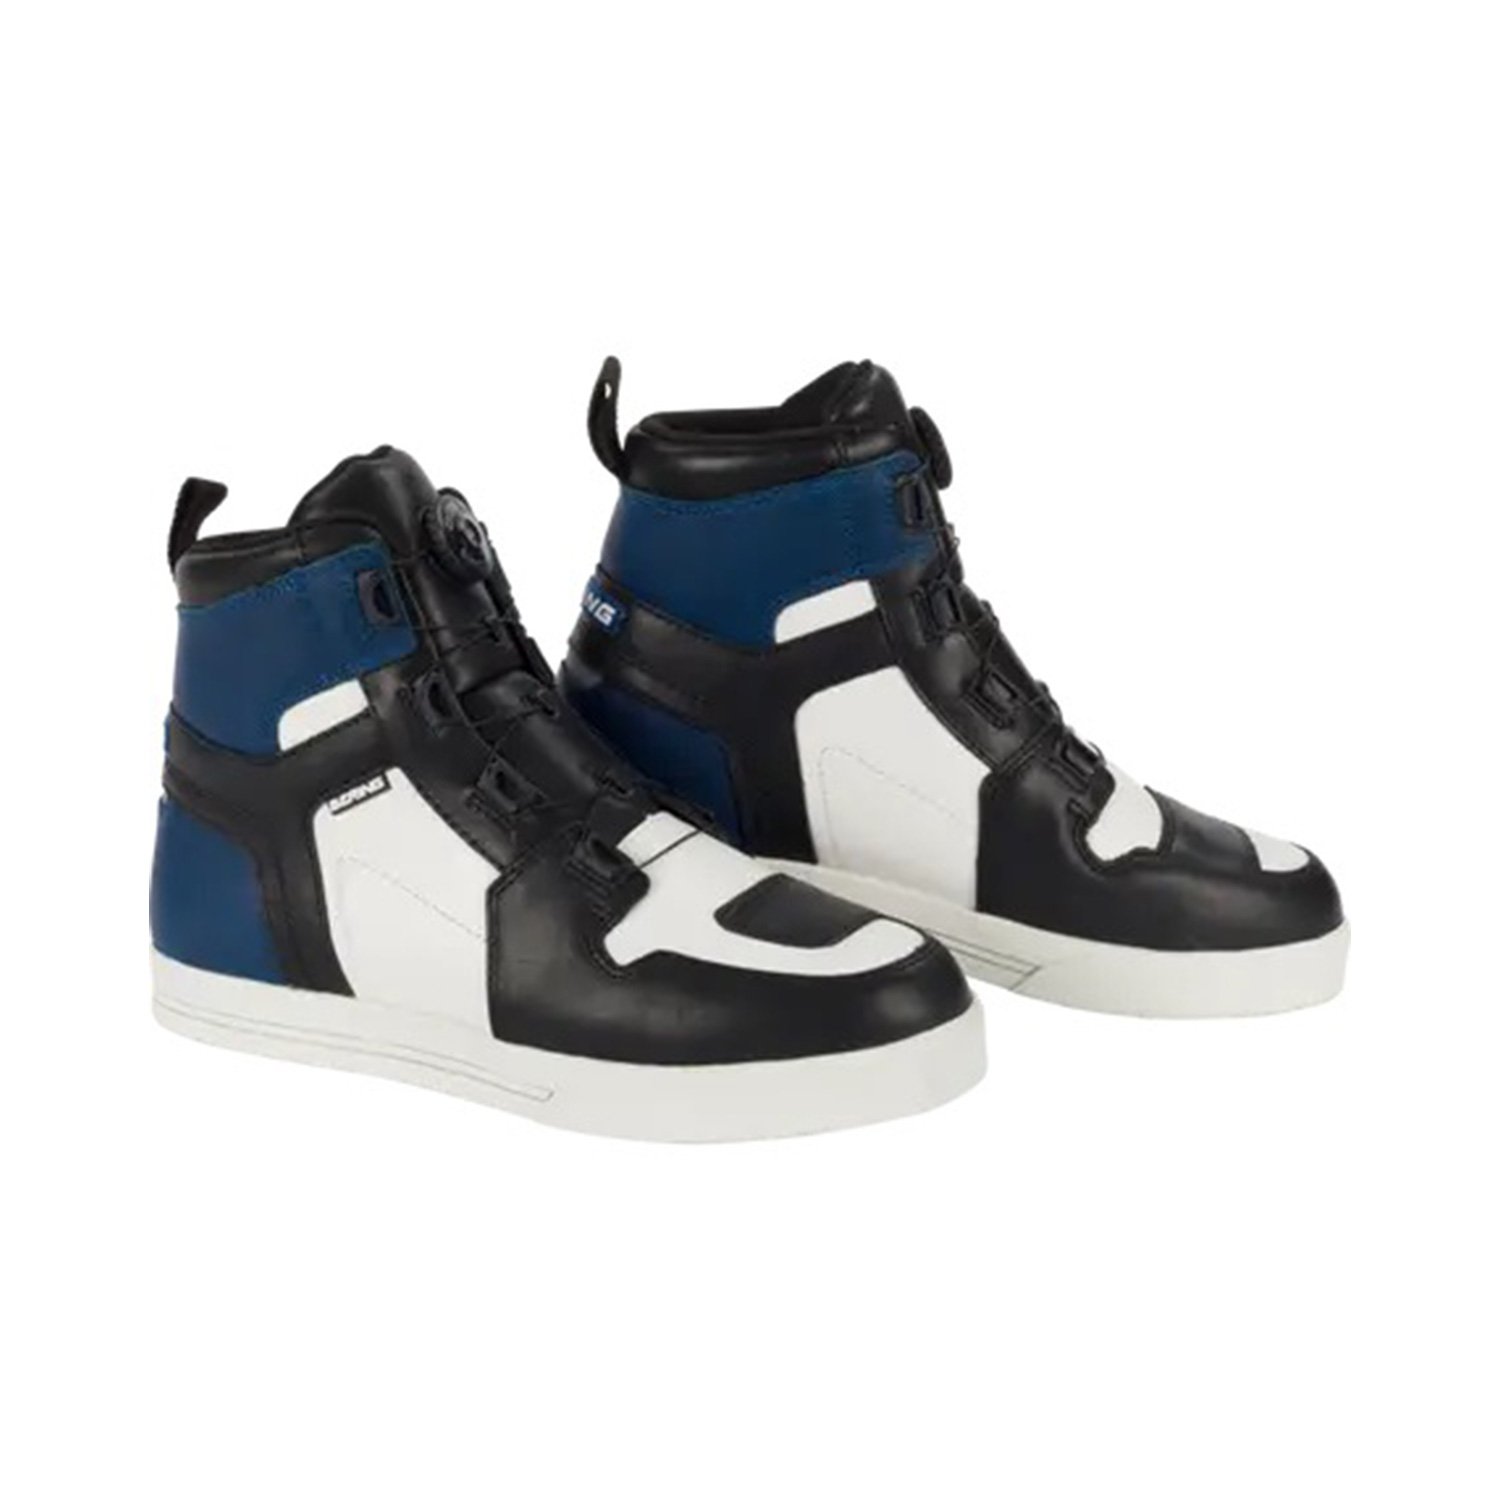 Image of Bering Sneakers Reflex A-Top Black White Blue Size 41 ID 3660815176757